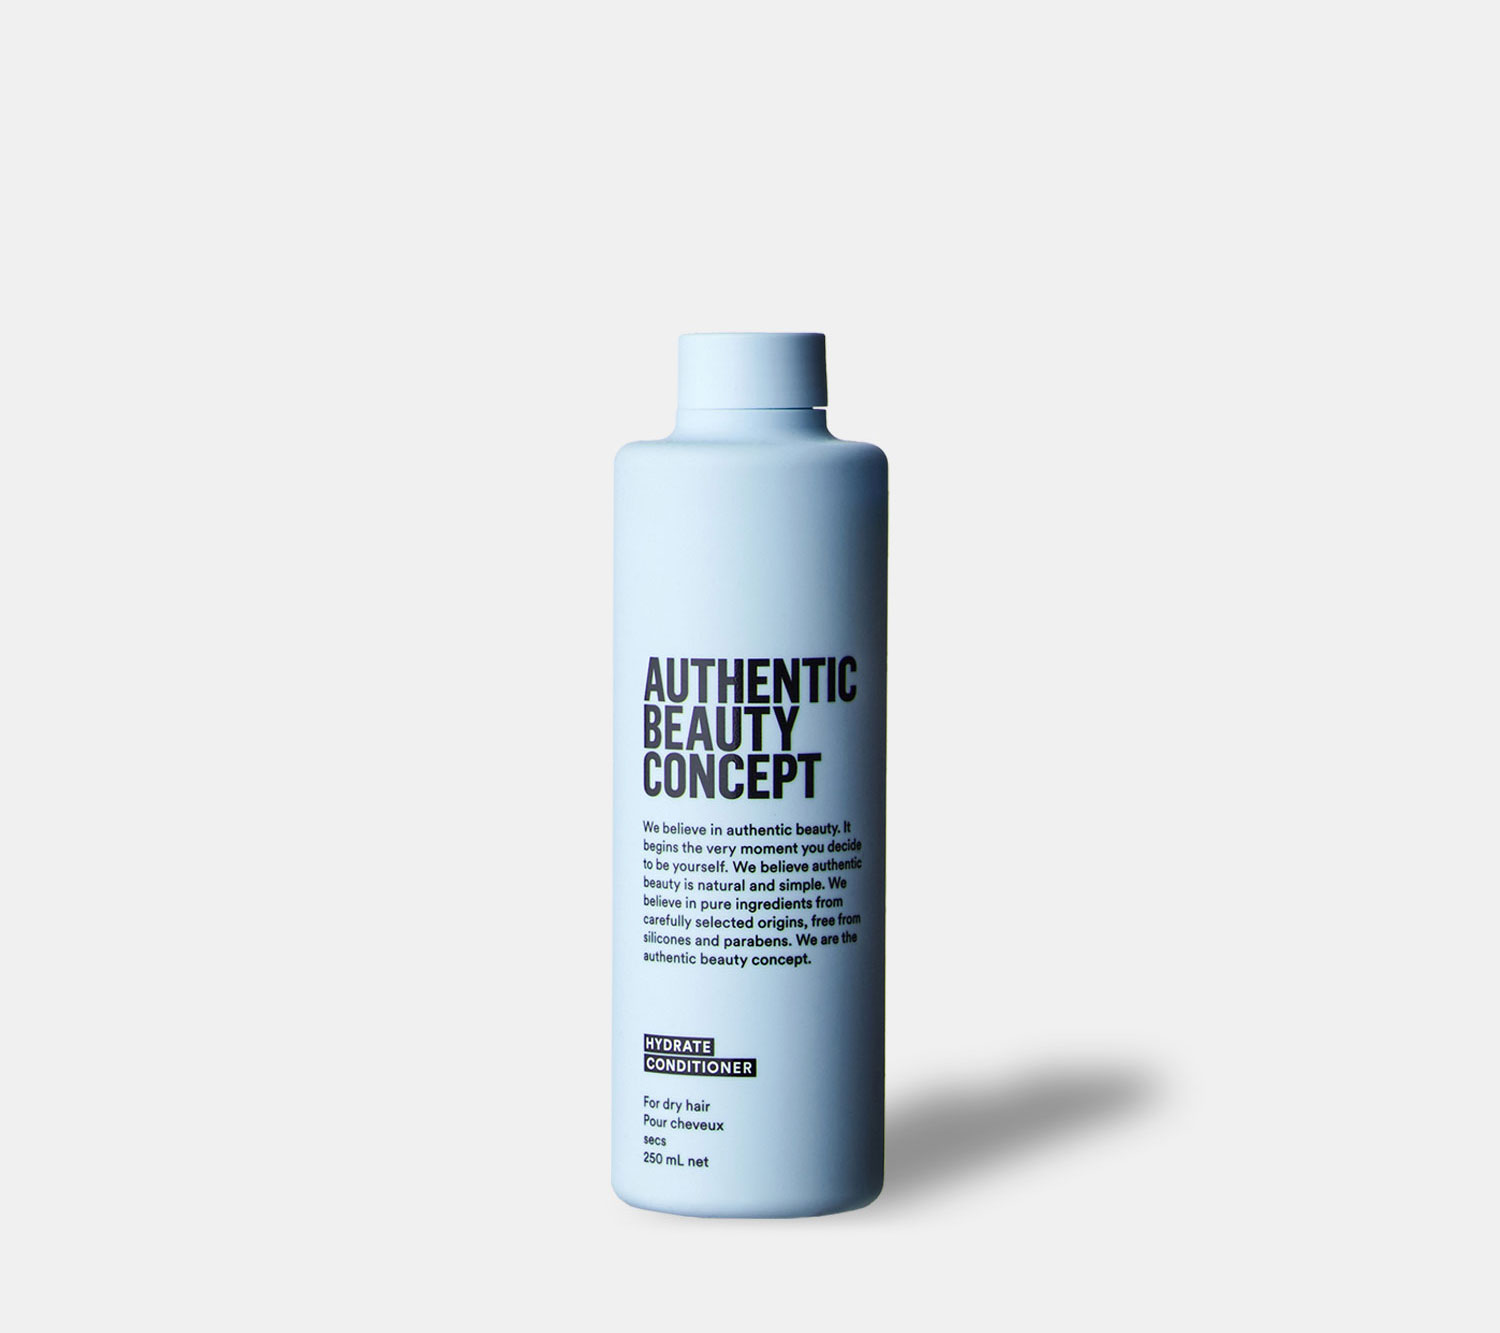 AUTHENTIC BEAUTY CONCEPT HYDRATE CONDITIONER